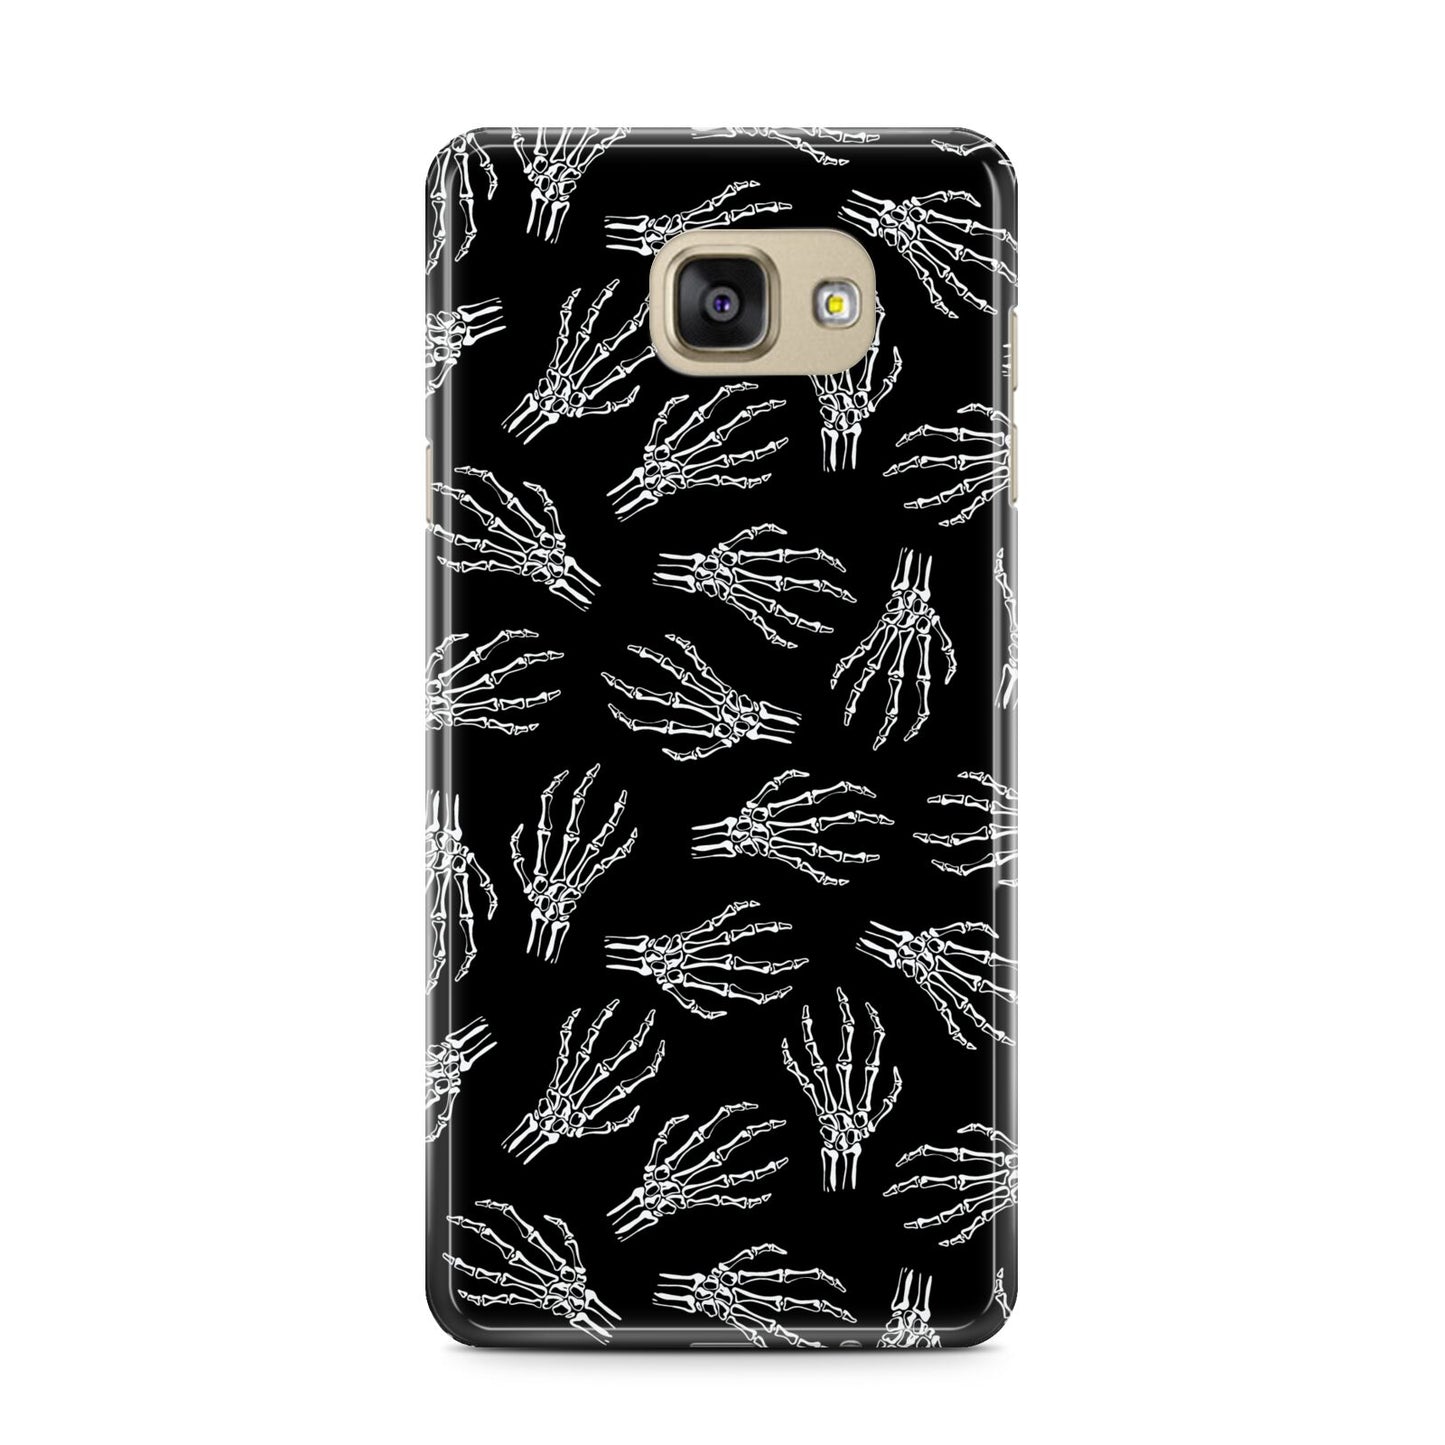 Skeleton Hands Samsung Galaxy A7 2016 Case on gold phone